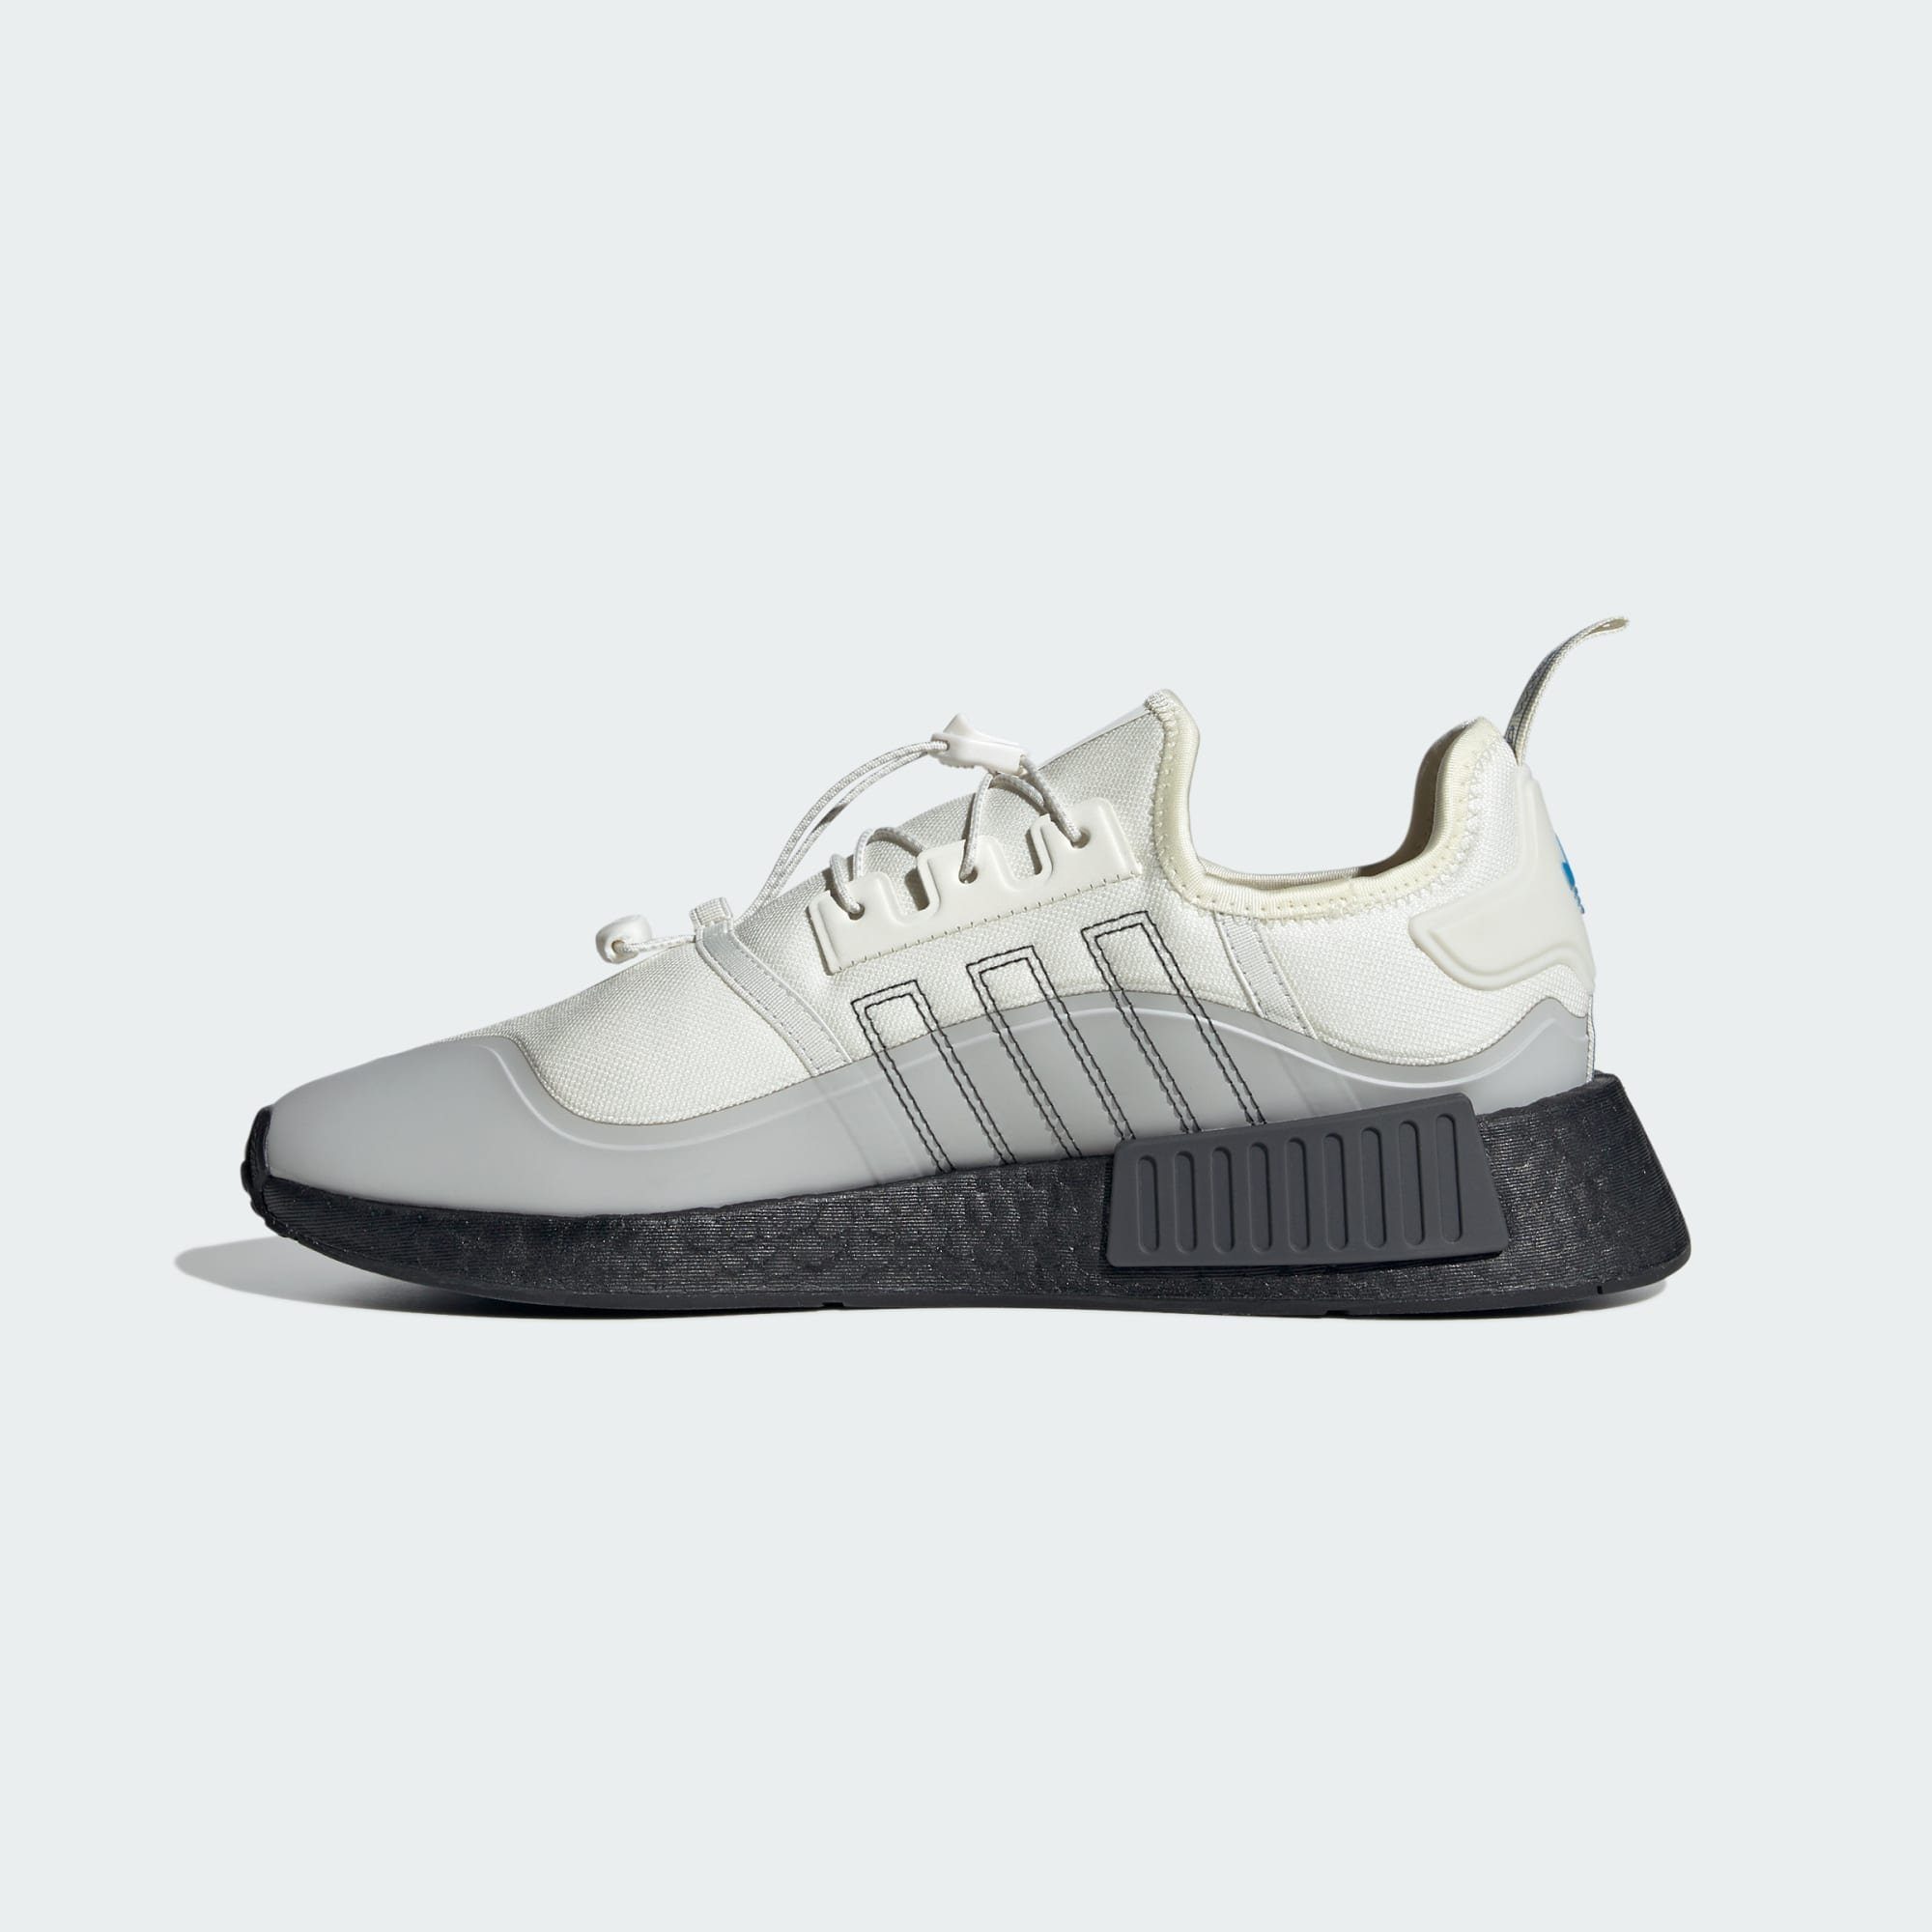 SCHUH White Off Grey Originals / NMD_R1 Grey Two / Six Sneaker adidas